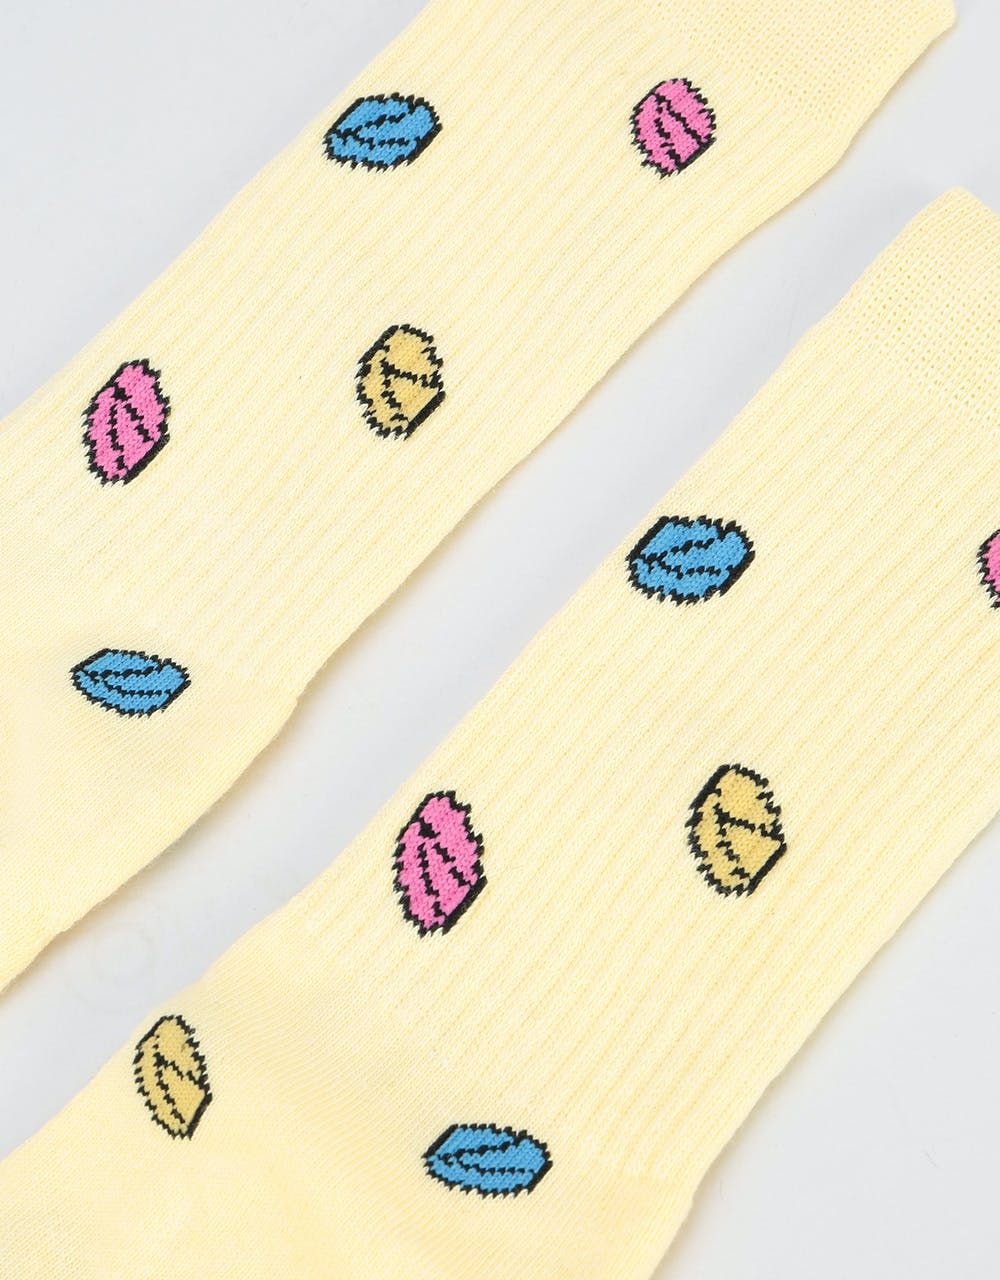 Route One Pillz Socks - Pale Yellow